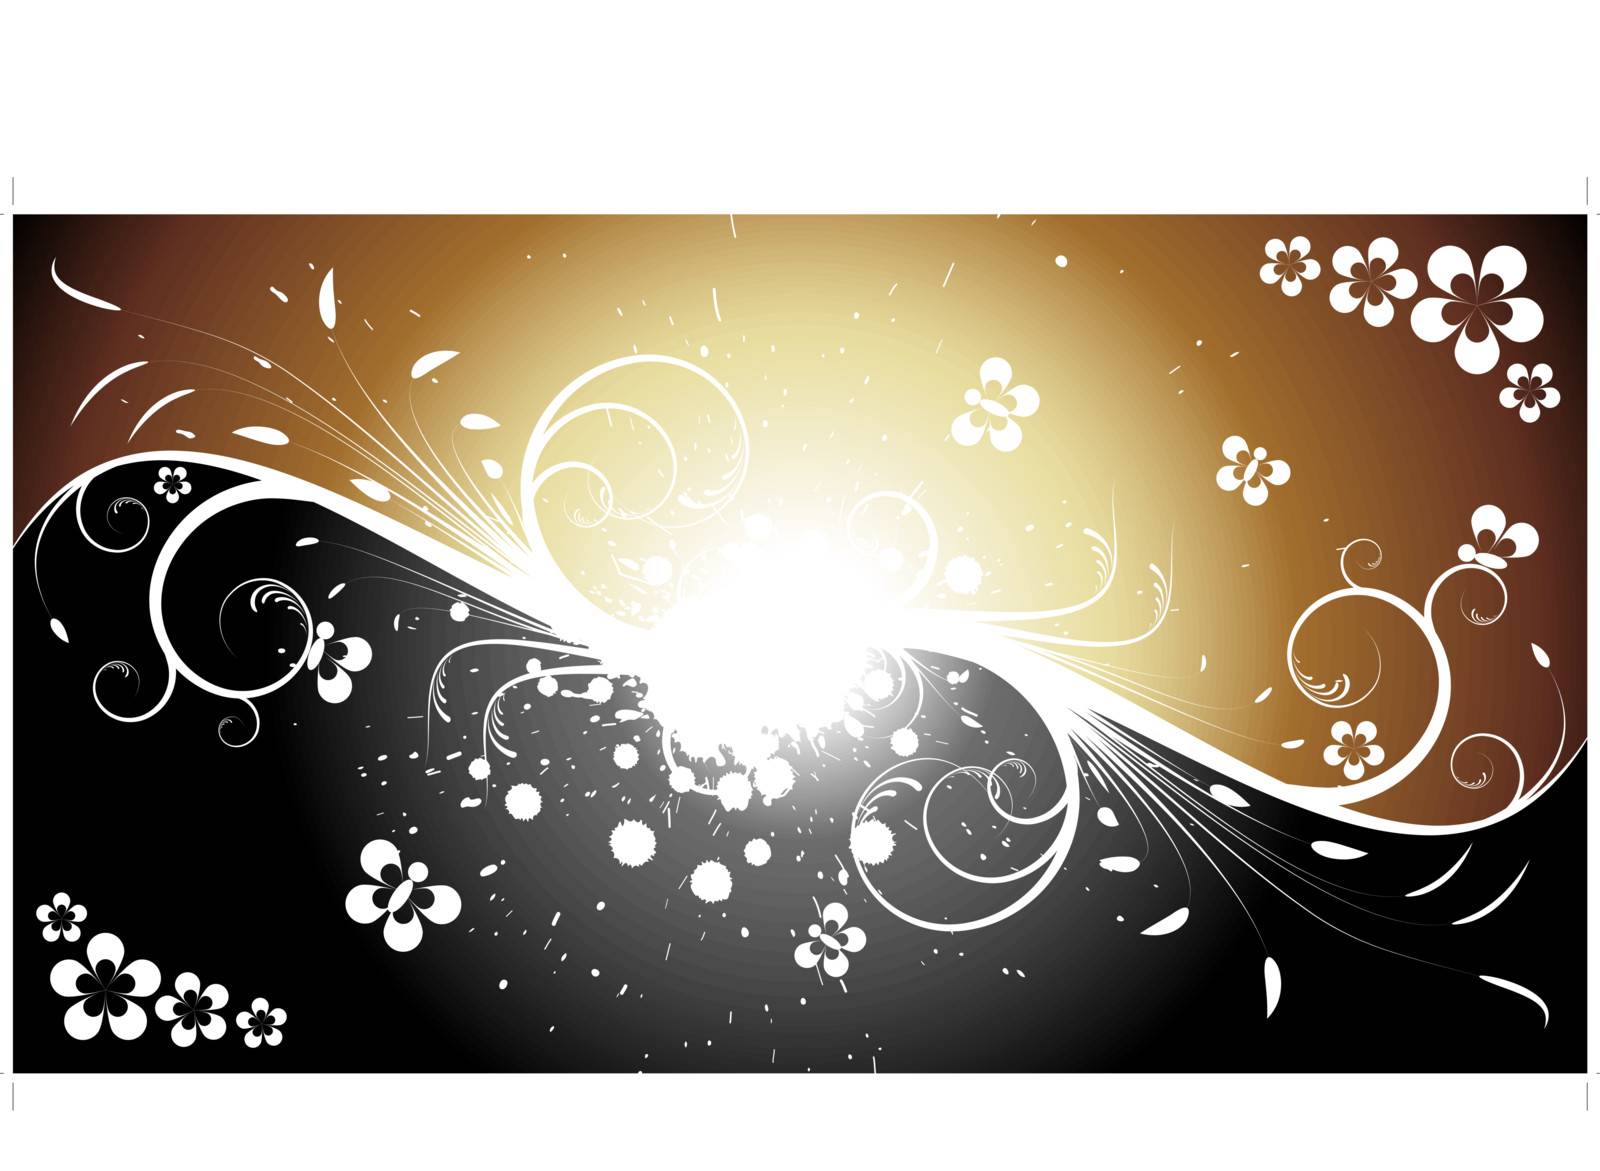 Abstract funeral background - black, white and golden colors